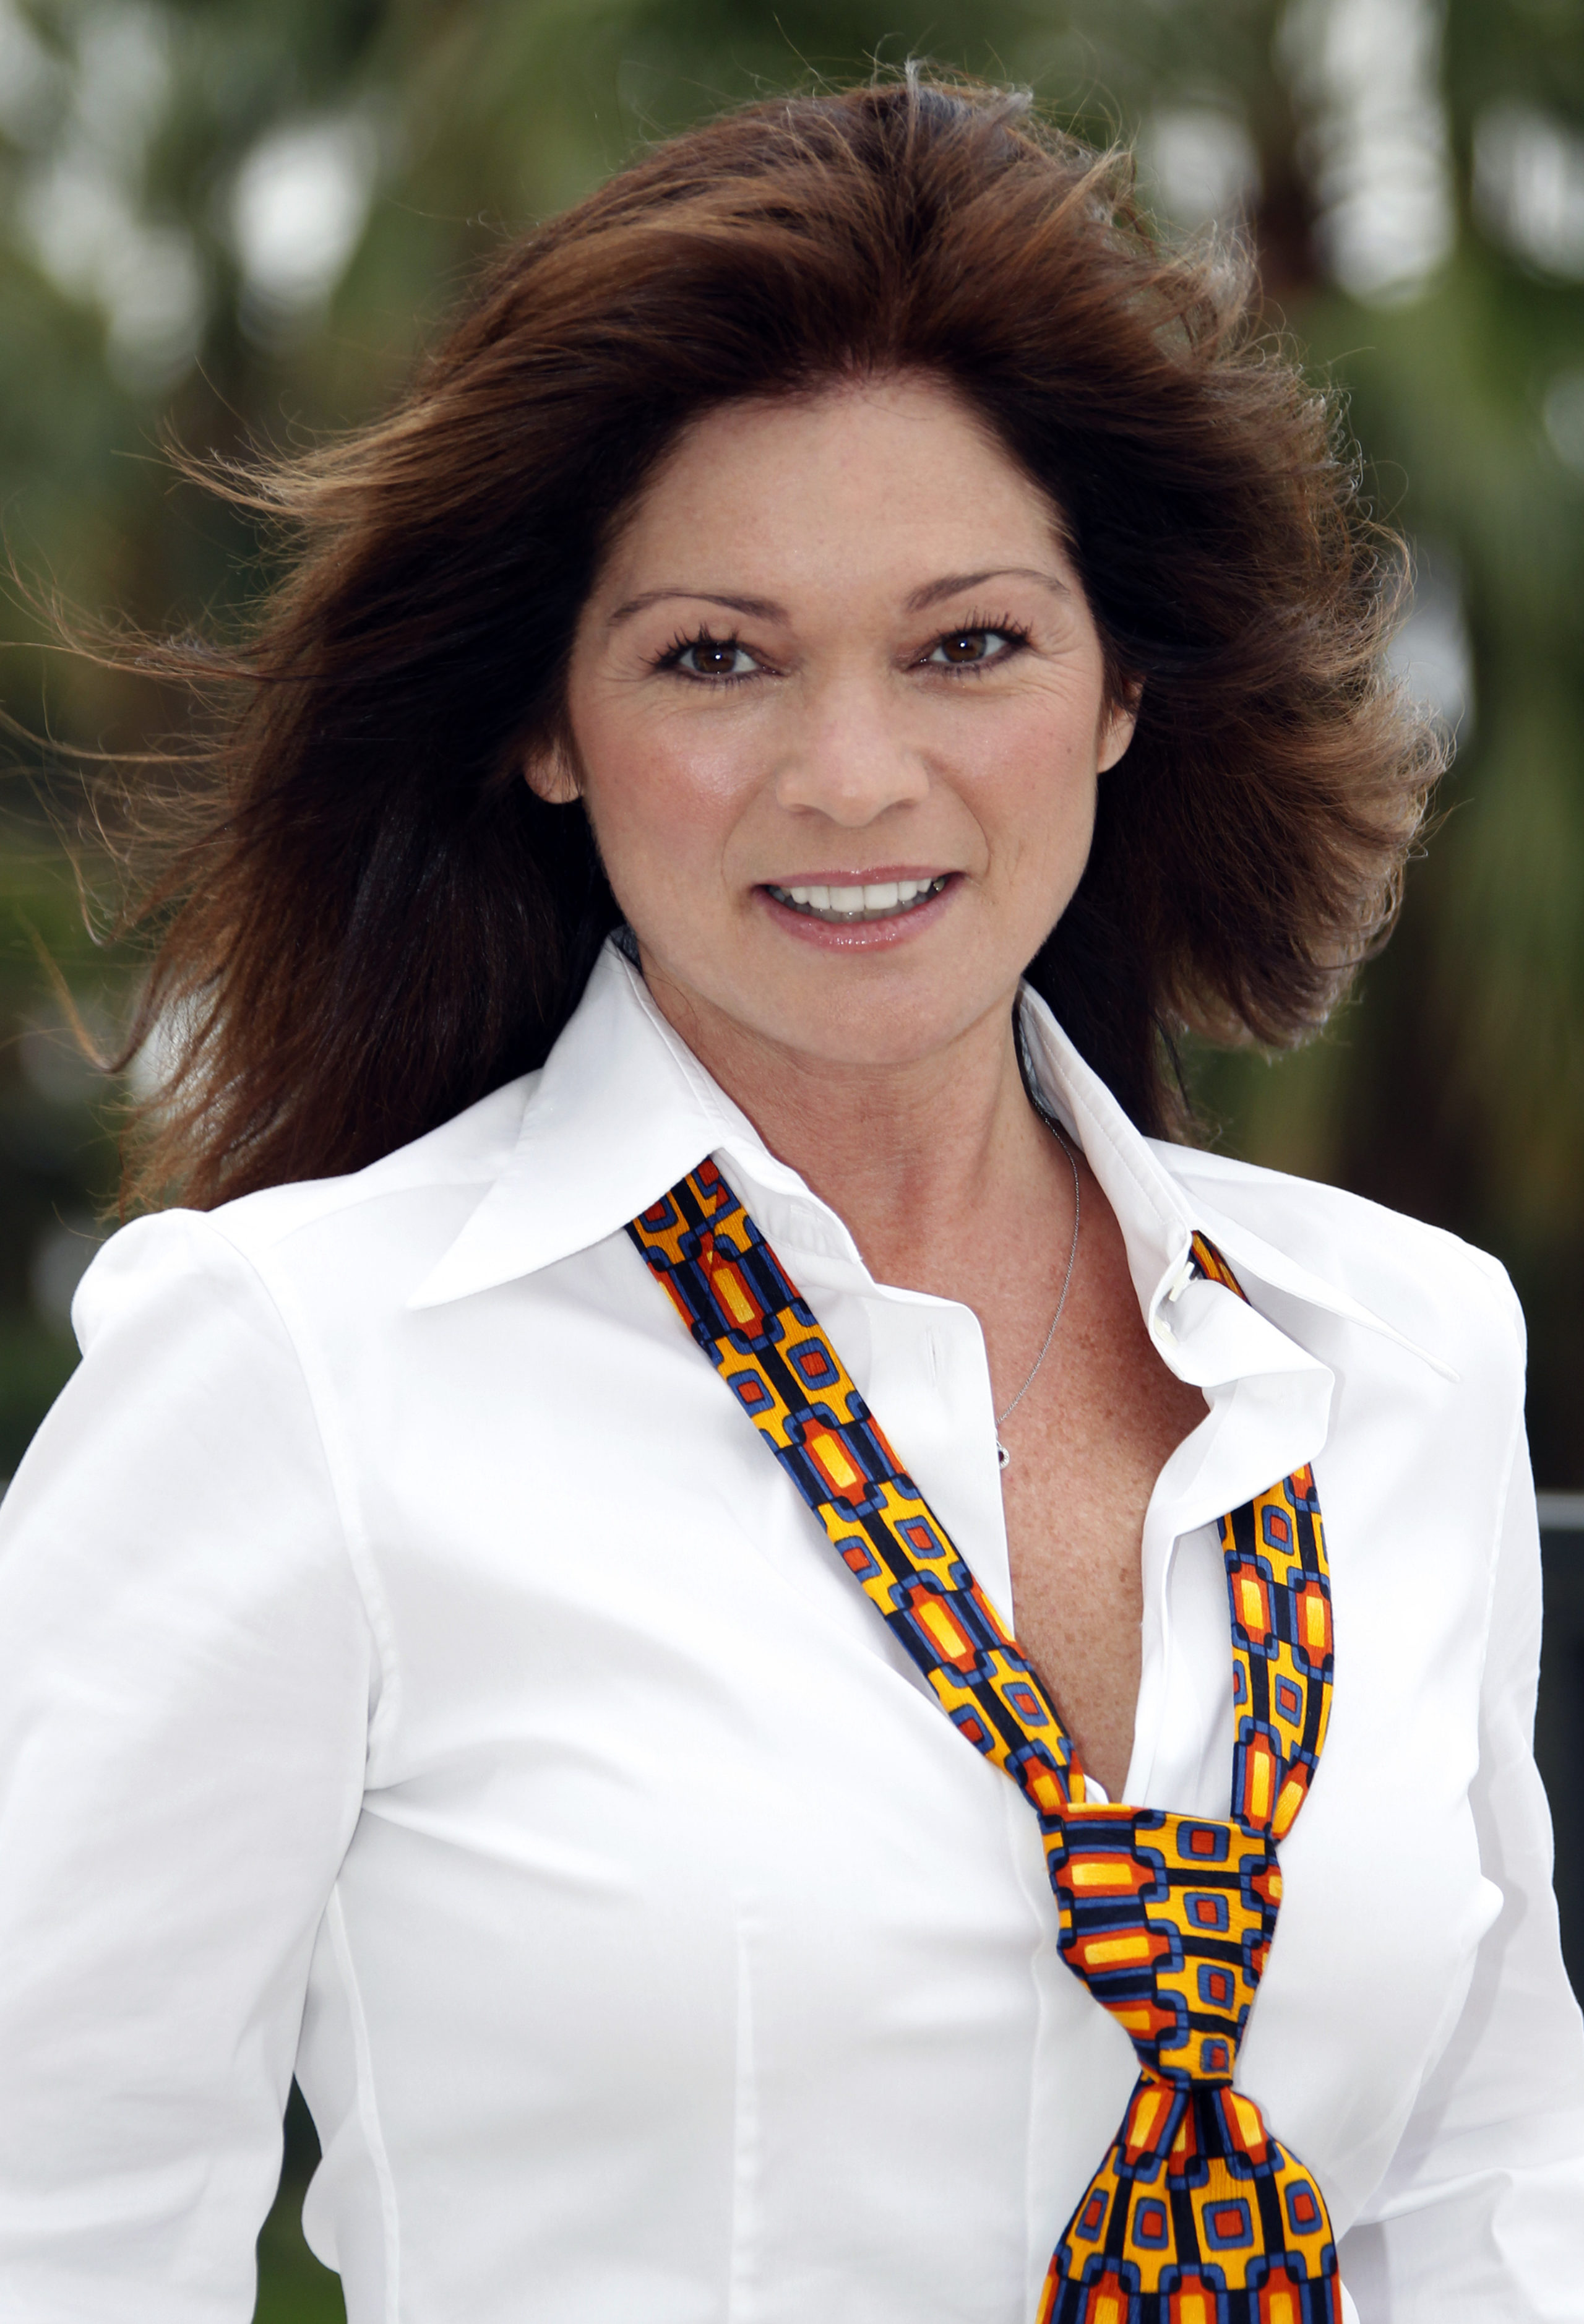 U.S. actress Valerie Bertinelli poses during a photocall to promote her television series " Hot in Cleveland" at the annual MIPCOM television programme market in Cannes, southeastern France, October 4, 2010. The International film and programme market for TV, video, cable and satellite (MIPCOM) opens from October 4 to October 8 on the French Riviera. REUTERS/Eric Gaillard (FRANCE - Tags: ENTERTAINMENT HEADSHOT BUSINESS MEDIA)